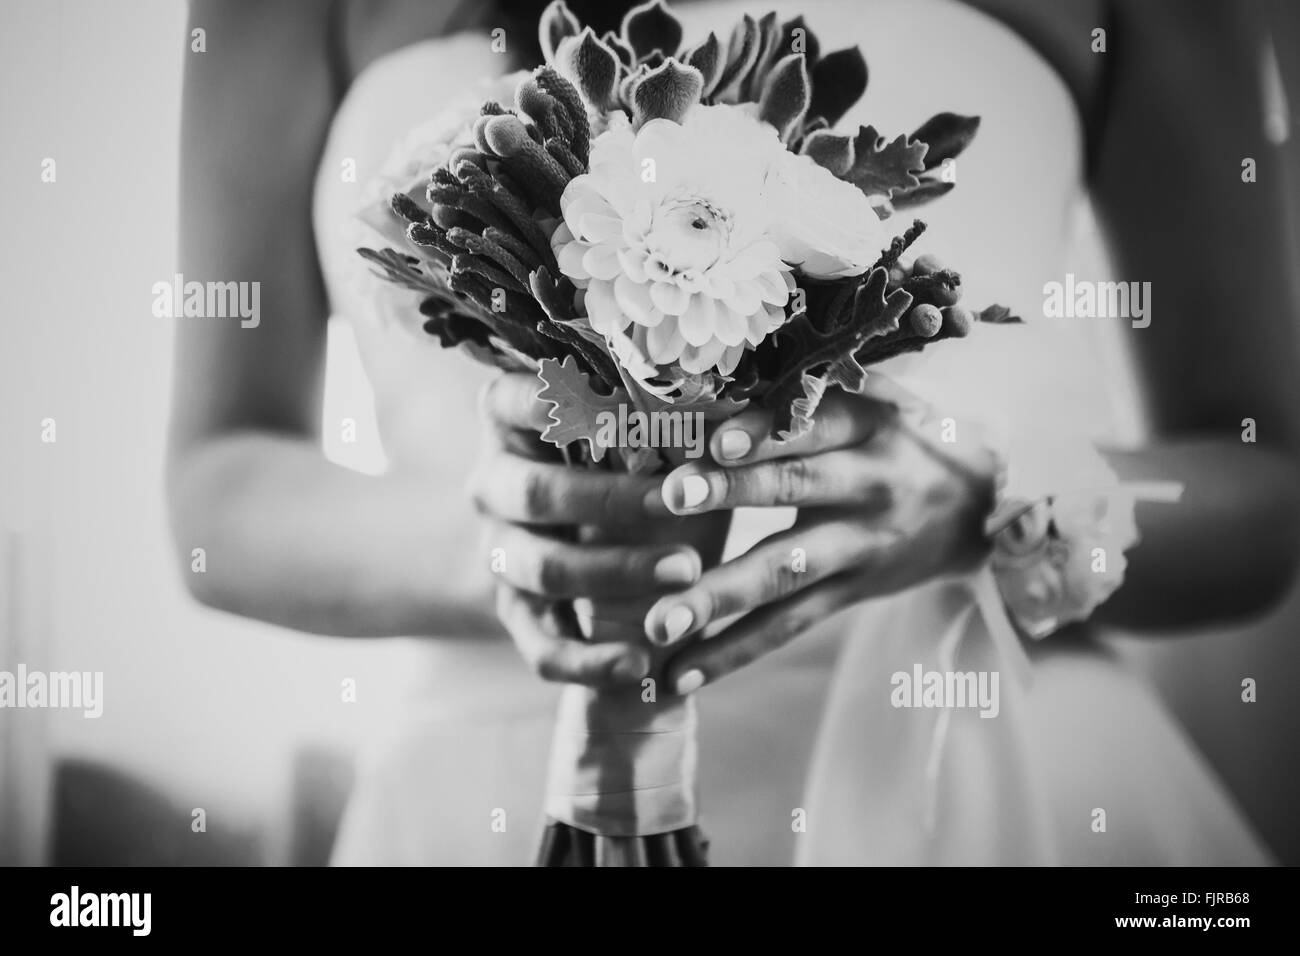 Black white photography beautiful wedding bouquet  of flowers in hands  the bride Stock Photo